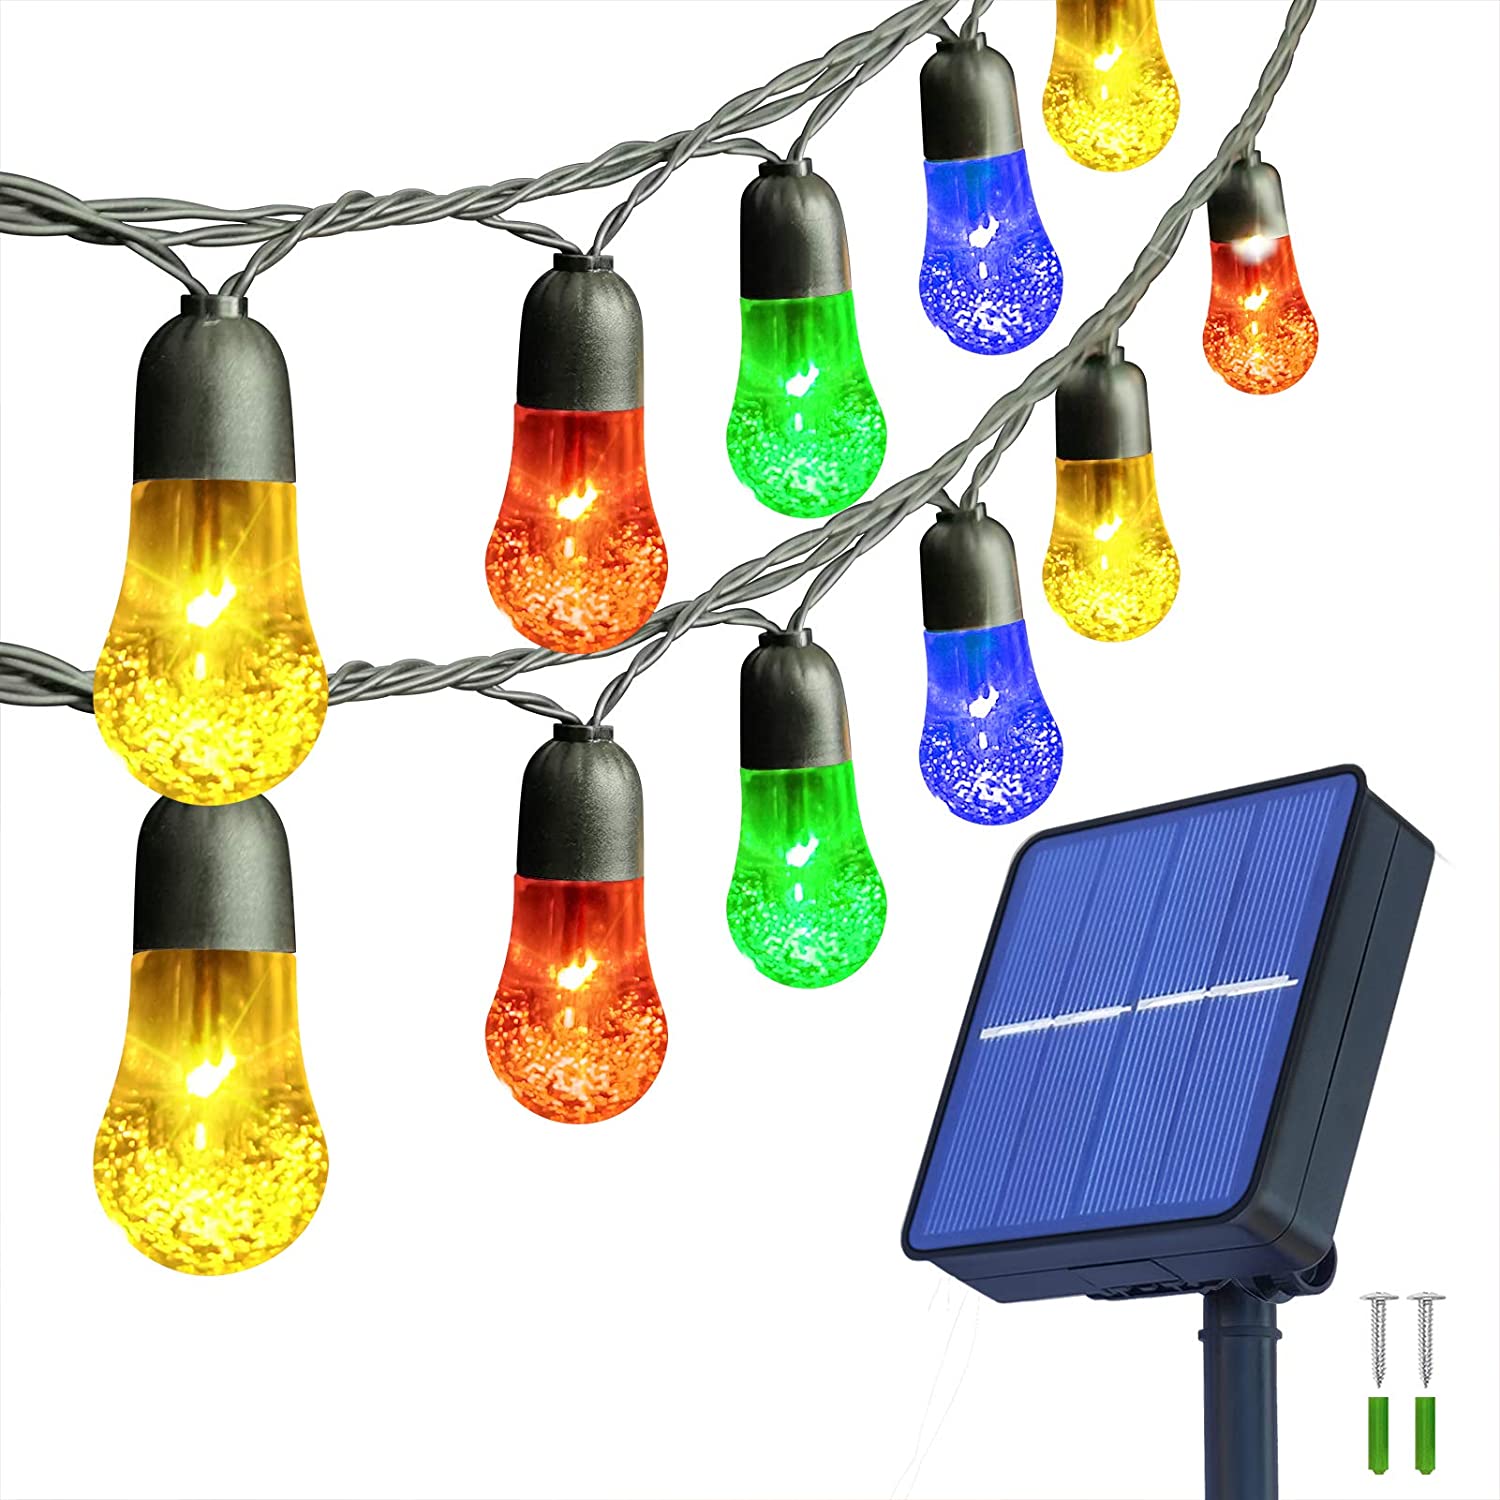 Outdoor Colorful Holiday Lighting Waterproof Solar Crystal String Light